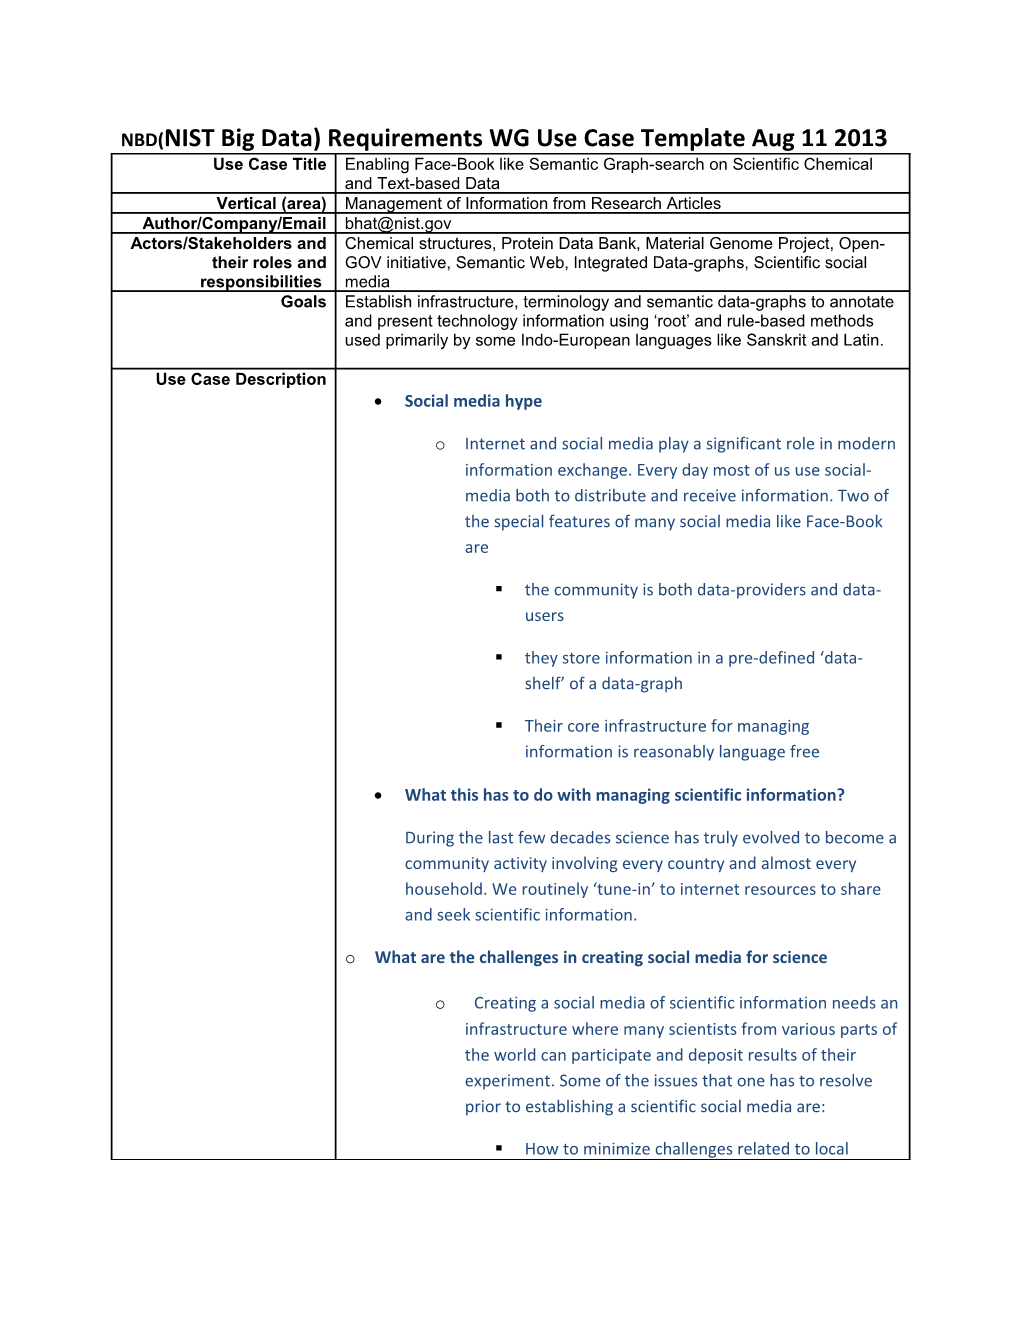 NBD(NIST Big Data) Requirements WG Use Case Template Aug 11 2013